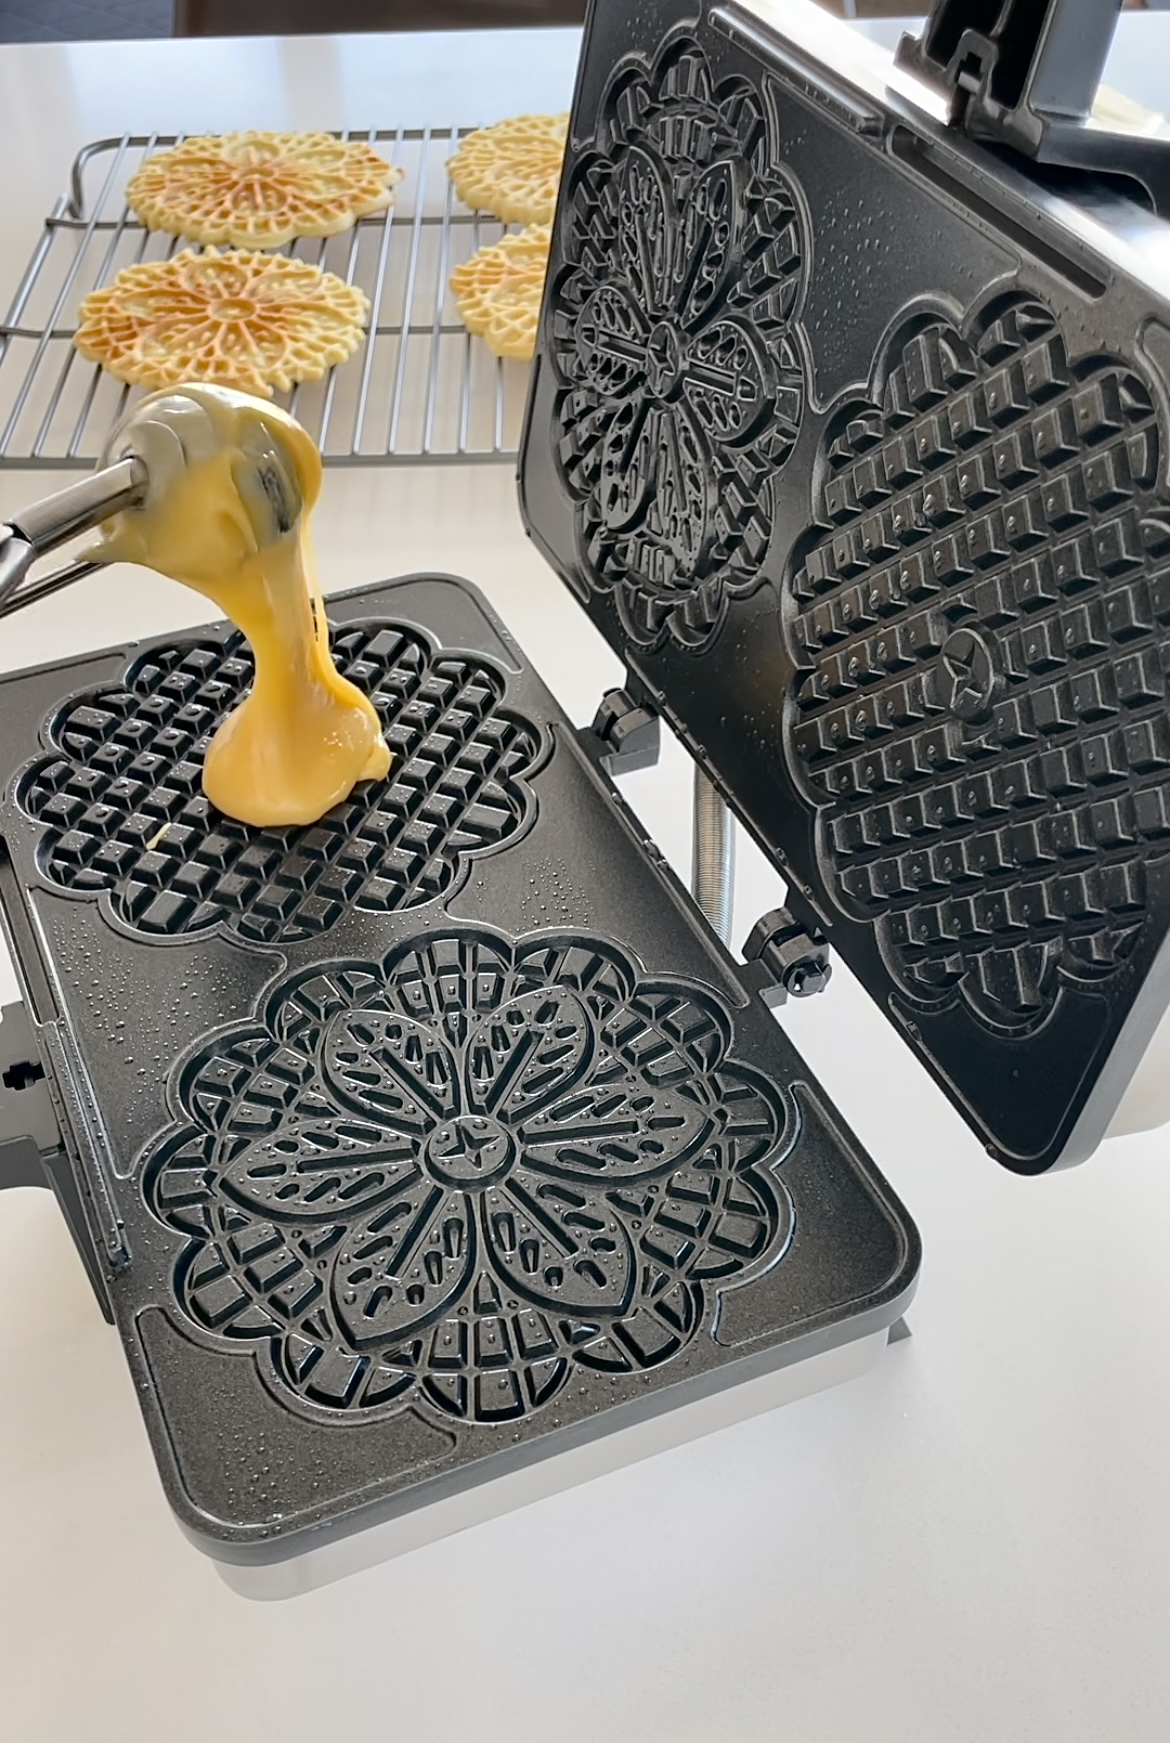 Pizzelle Maker Machine Iron Press Pastry Italian Waffle Cookie Cannoli  Cannolo